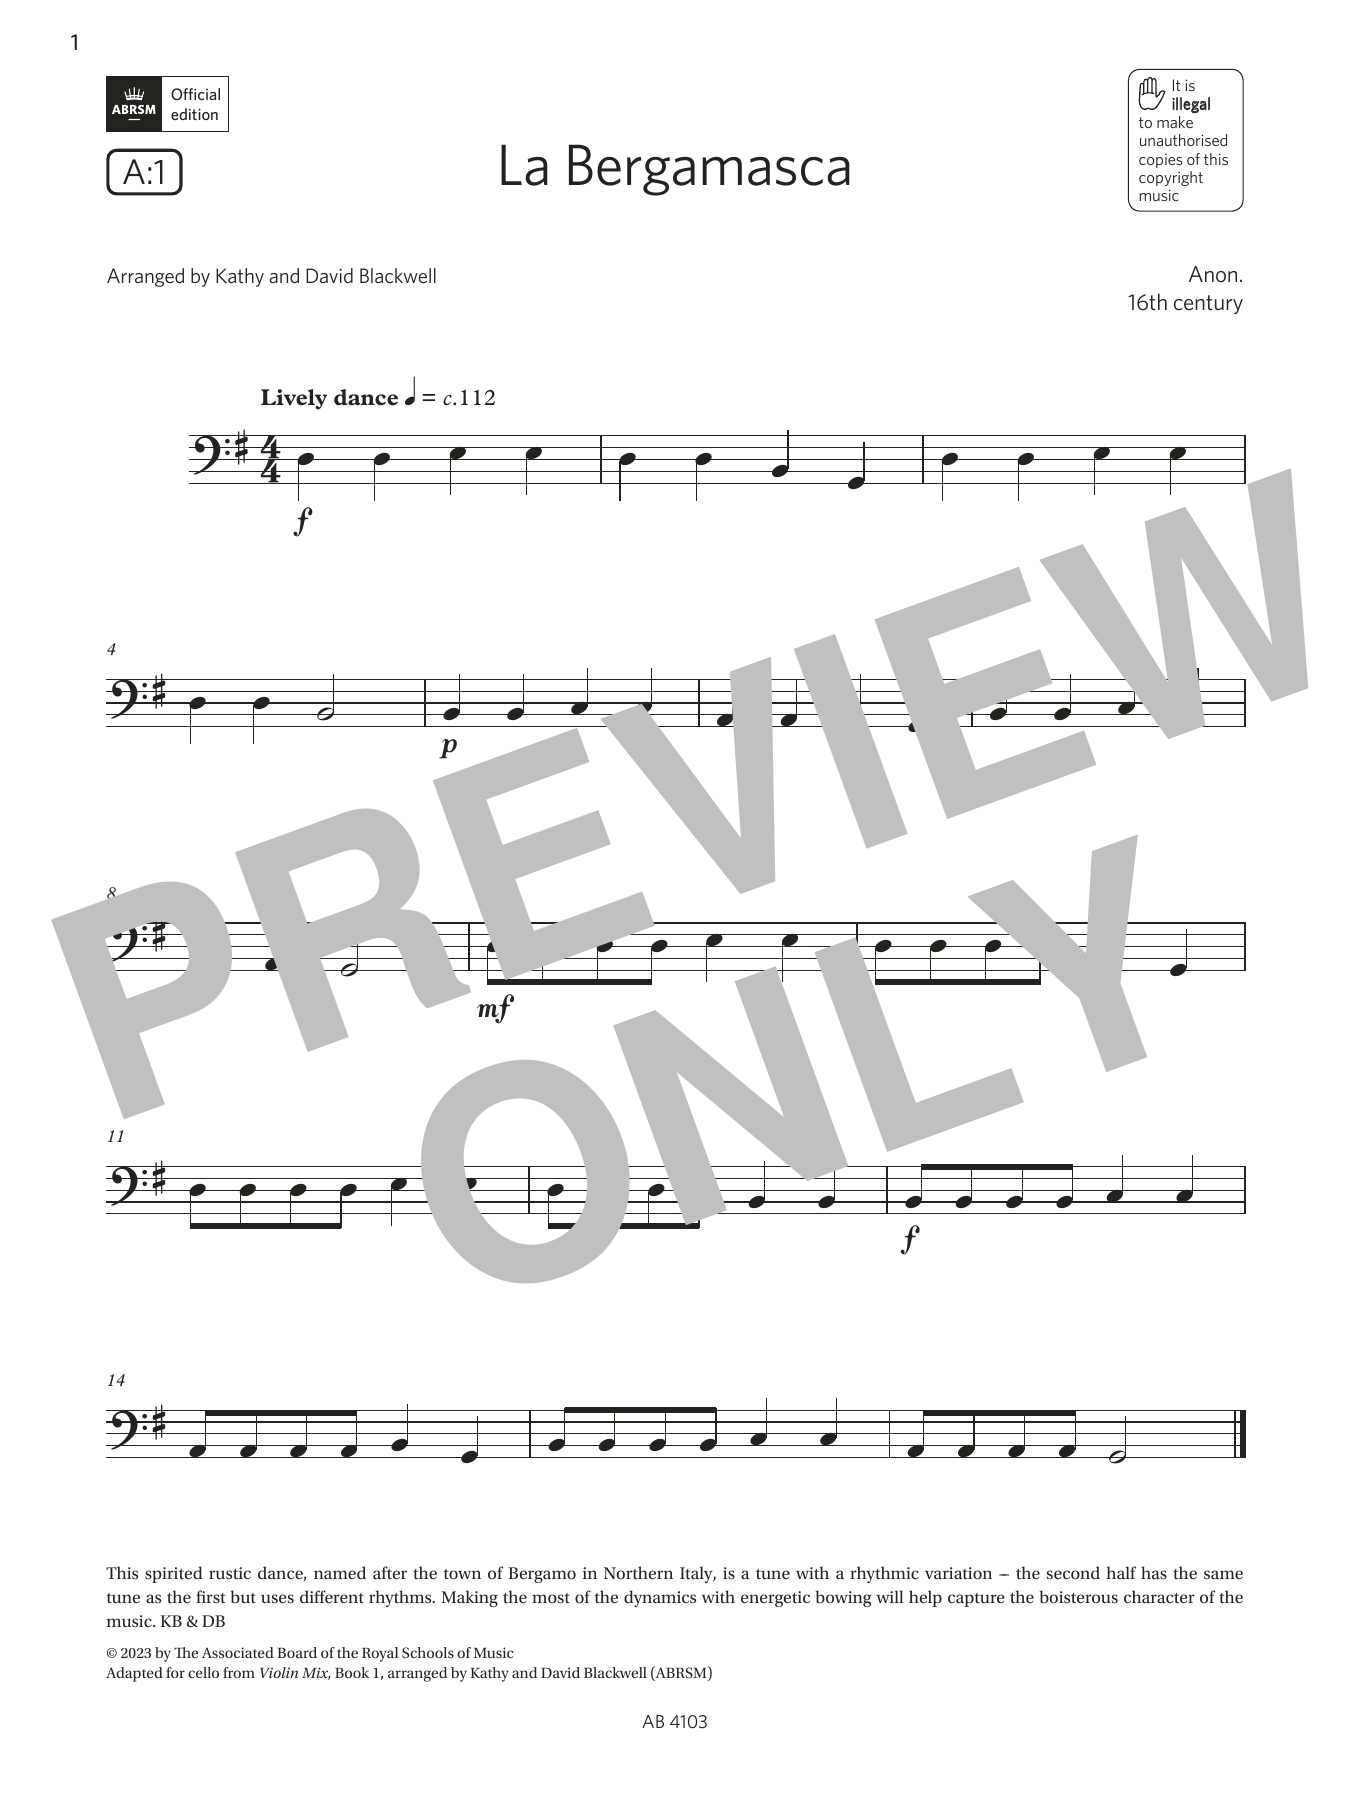 Download Anon. 16th century La Bergamasca (Grade Initial, A1, from Sheet Music